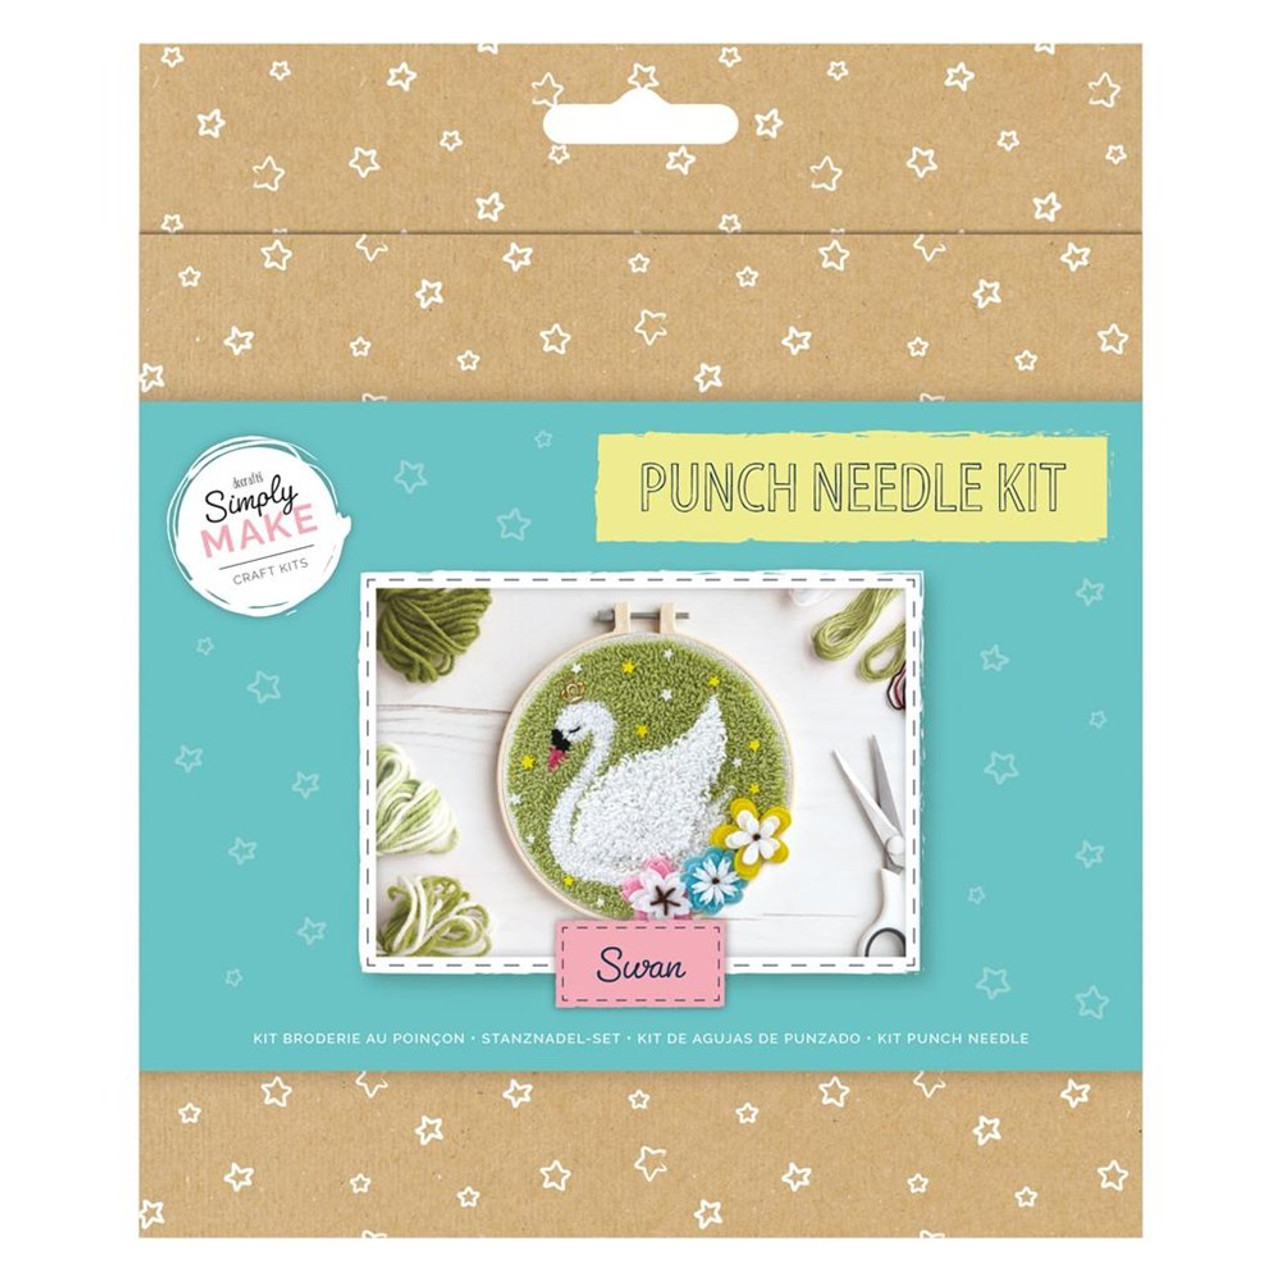 Docrafts Simply Make Punch Needle Swan Kit